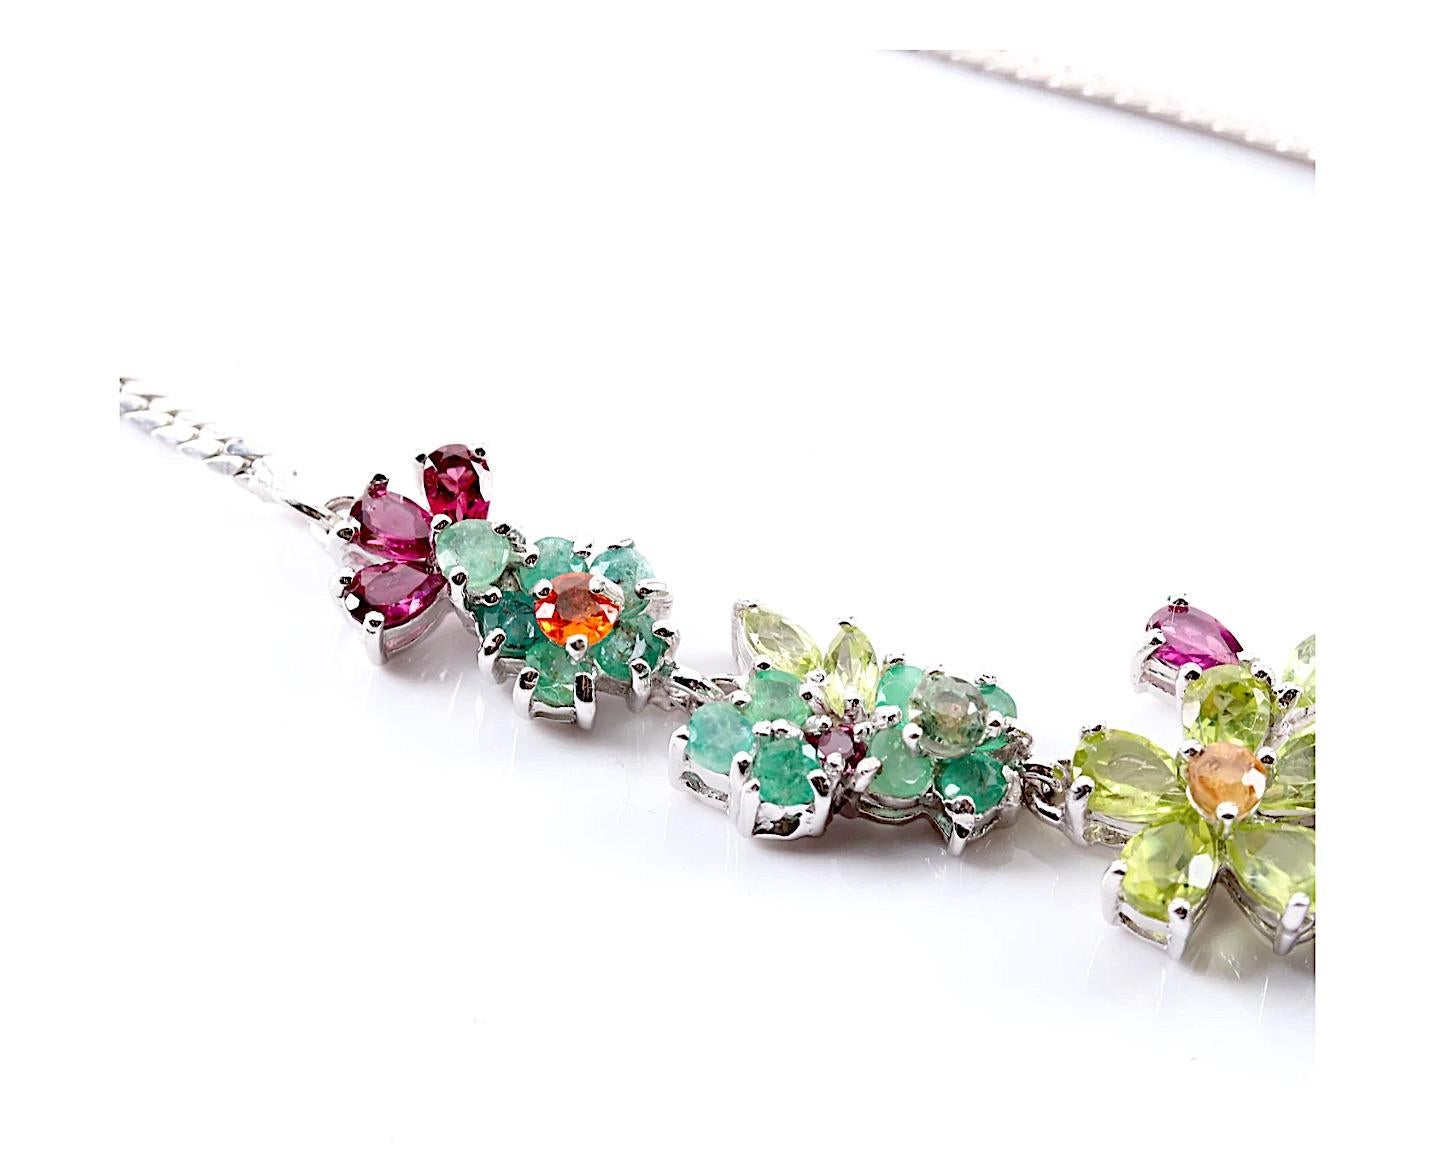 Marquise Cut Floral Gem Necklace- 34 ct- Peridot, Tourmaline, Sapphire, Emerald, Sterling Silver